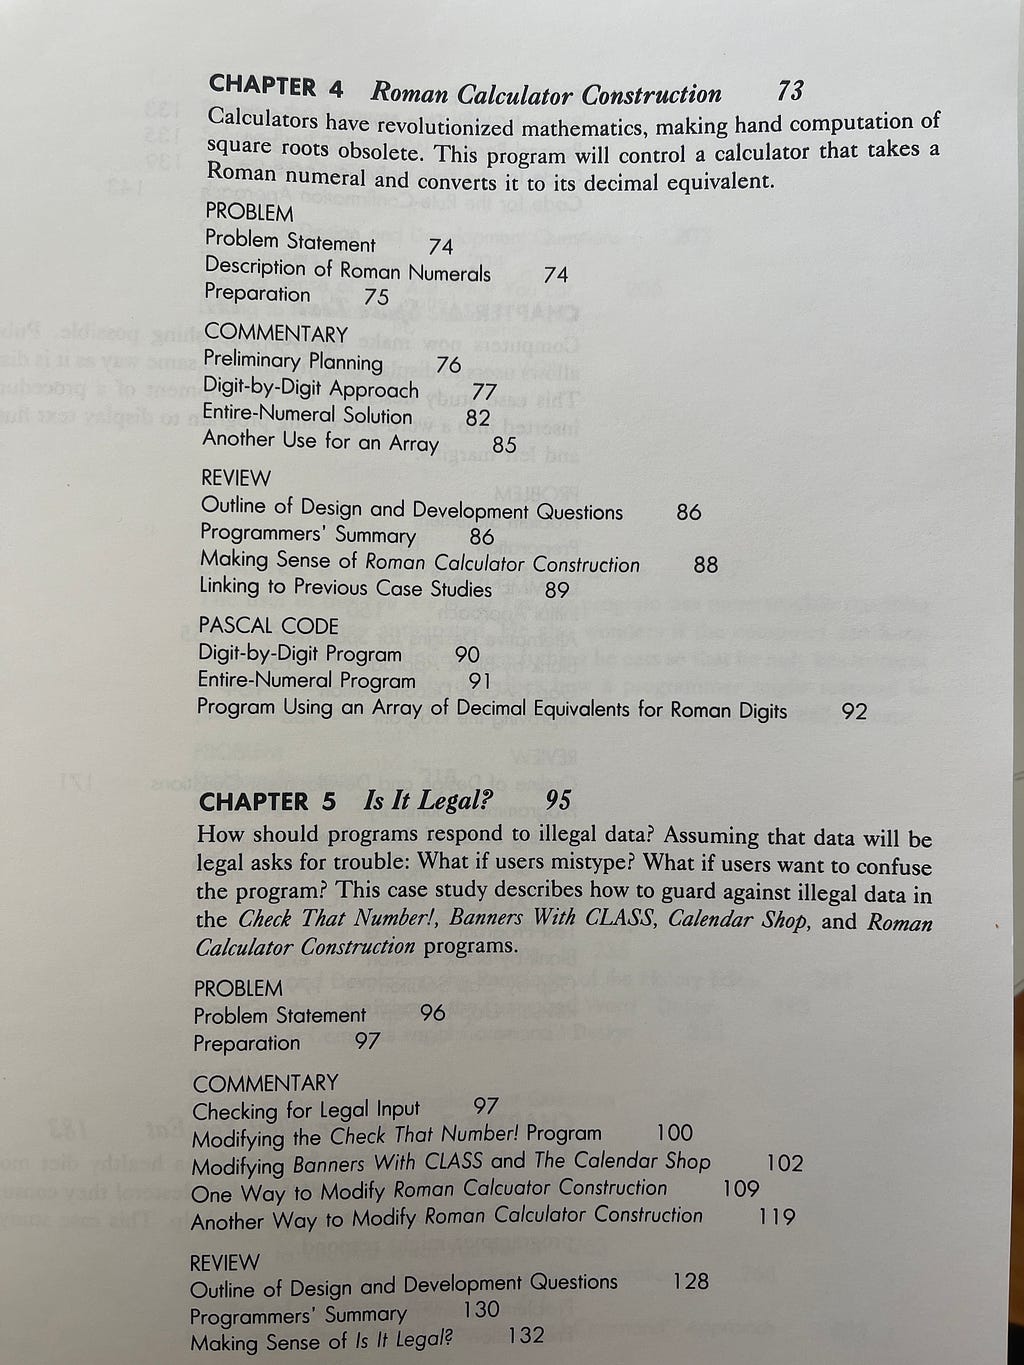 A description of each chapter, full concepts are spelled out, the description of the chapter / program is there in each chapter.